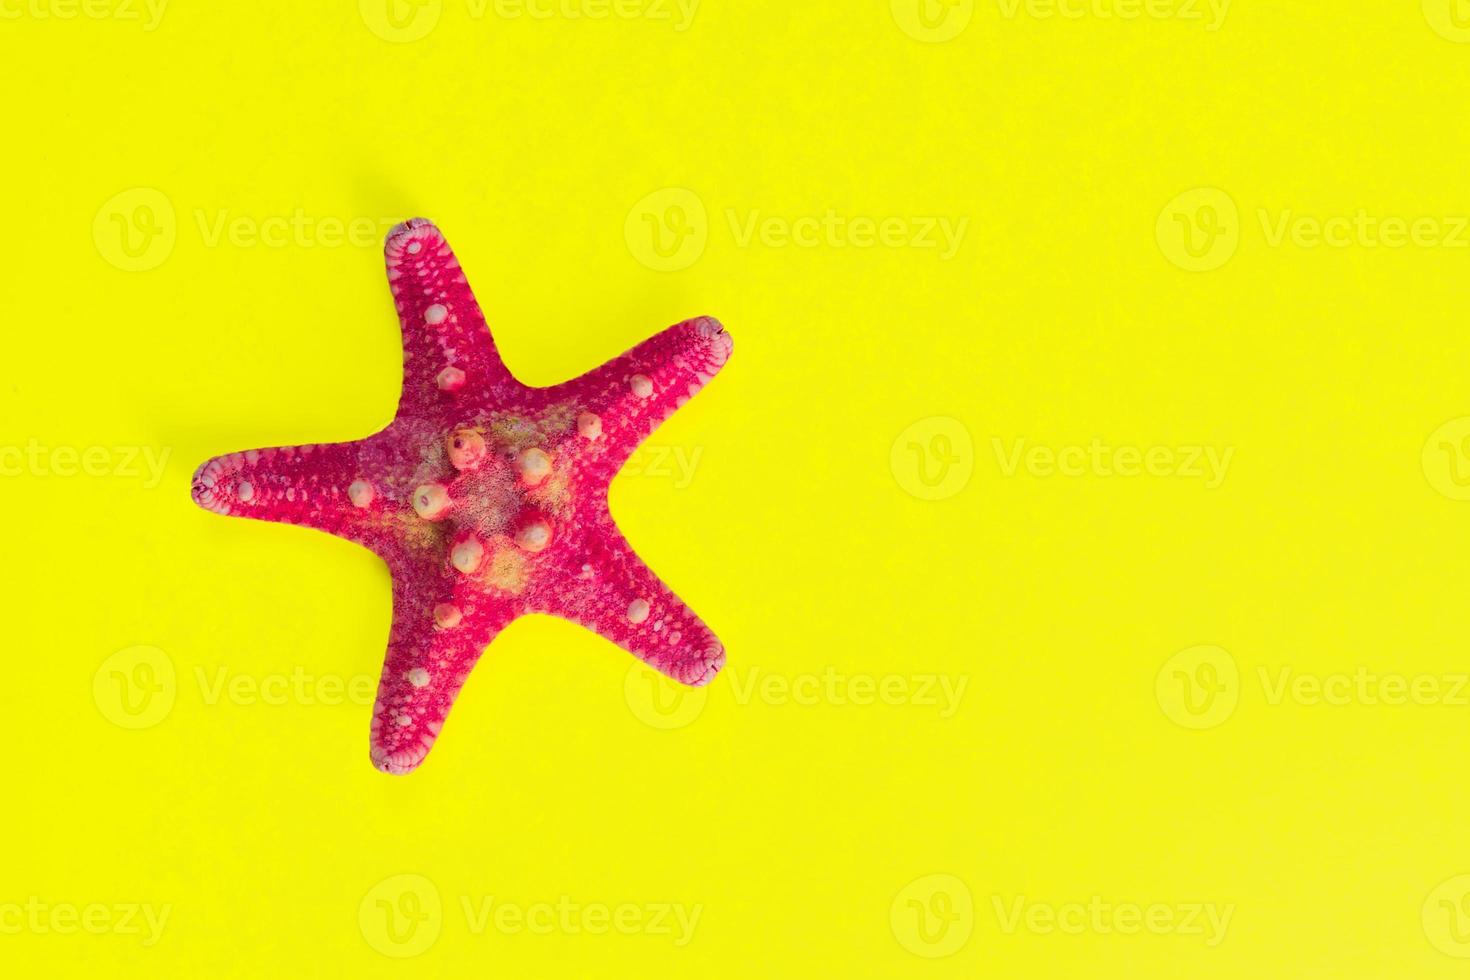 Red starfish on light yellow background with copy space. summer holiday and vacation concept photo